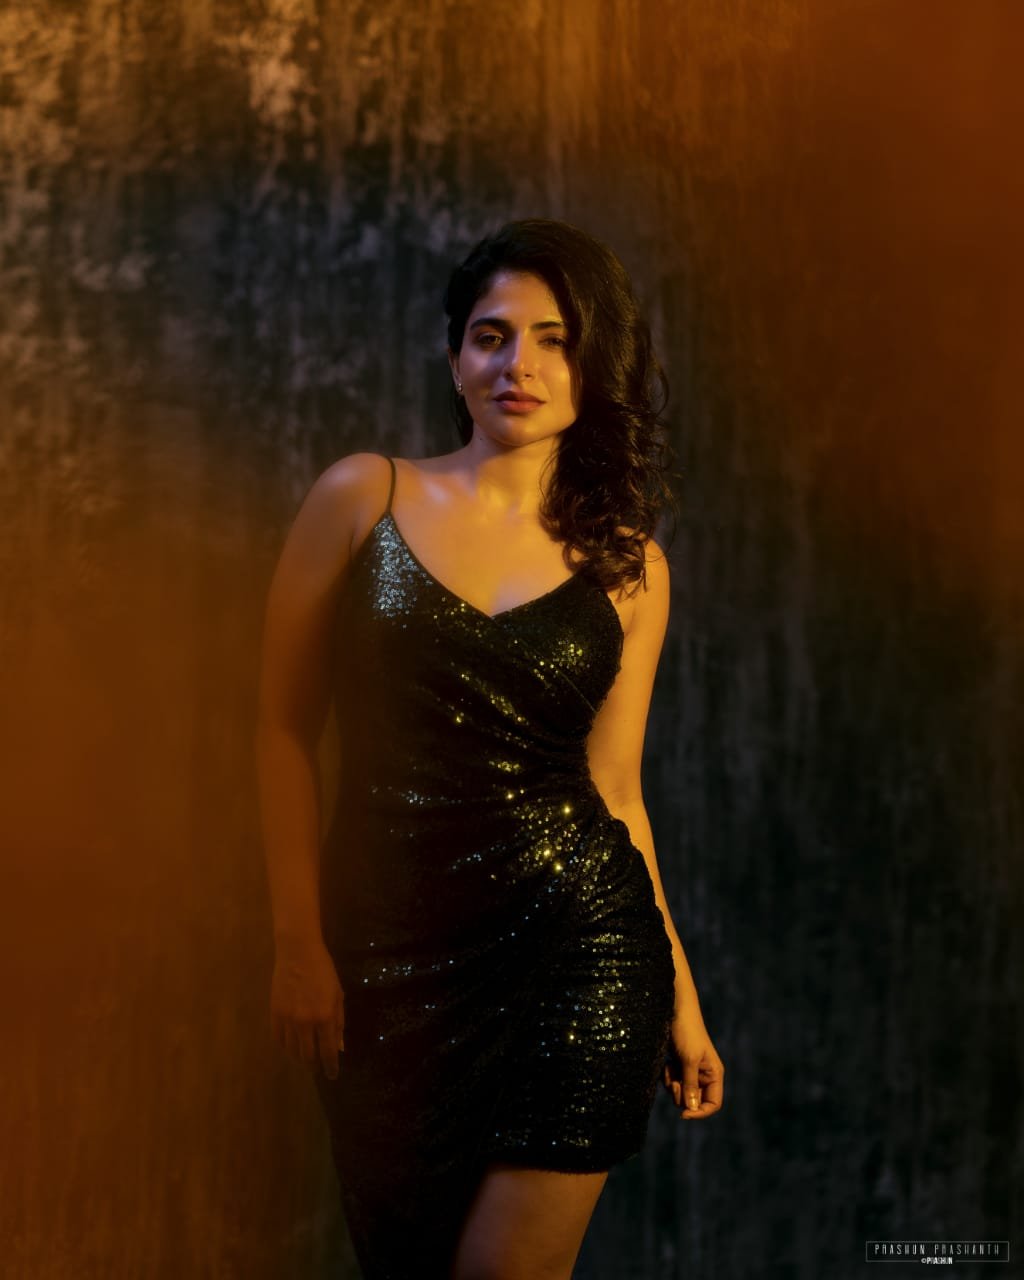 Actress iswarya menon looks gorgeous in glitter outfit